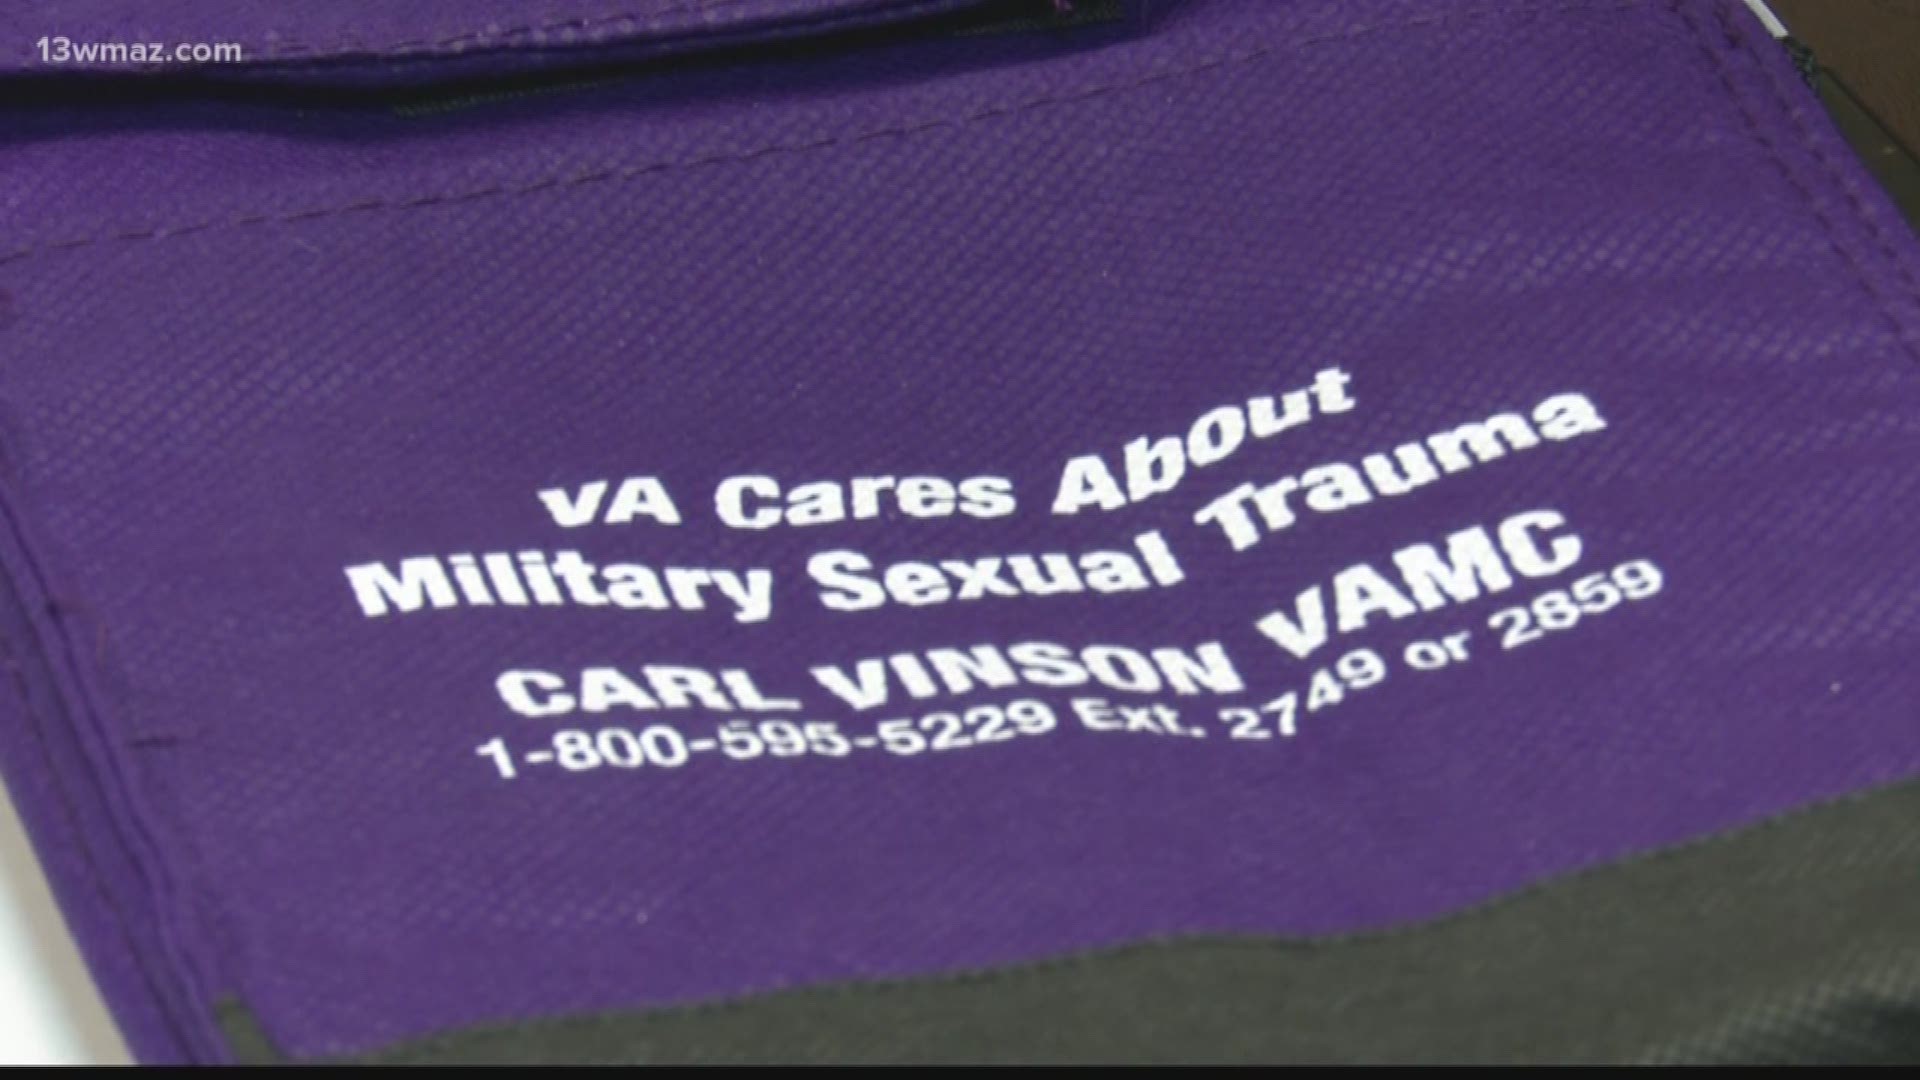 The Carl Vinson VA Medical Center has a new position dedicated to helping veterans who faced any type of abuse while serving.